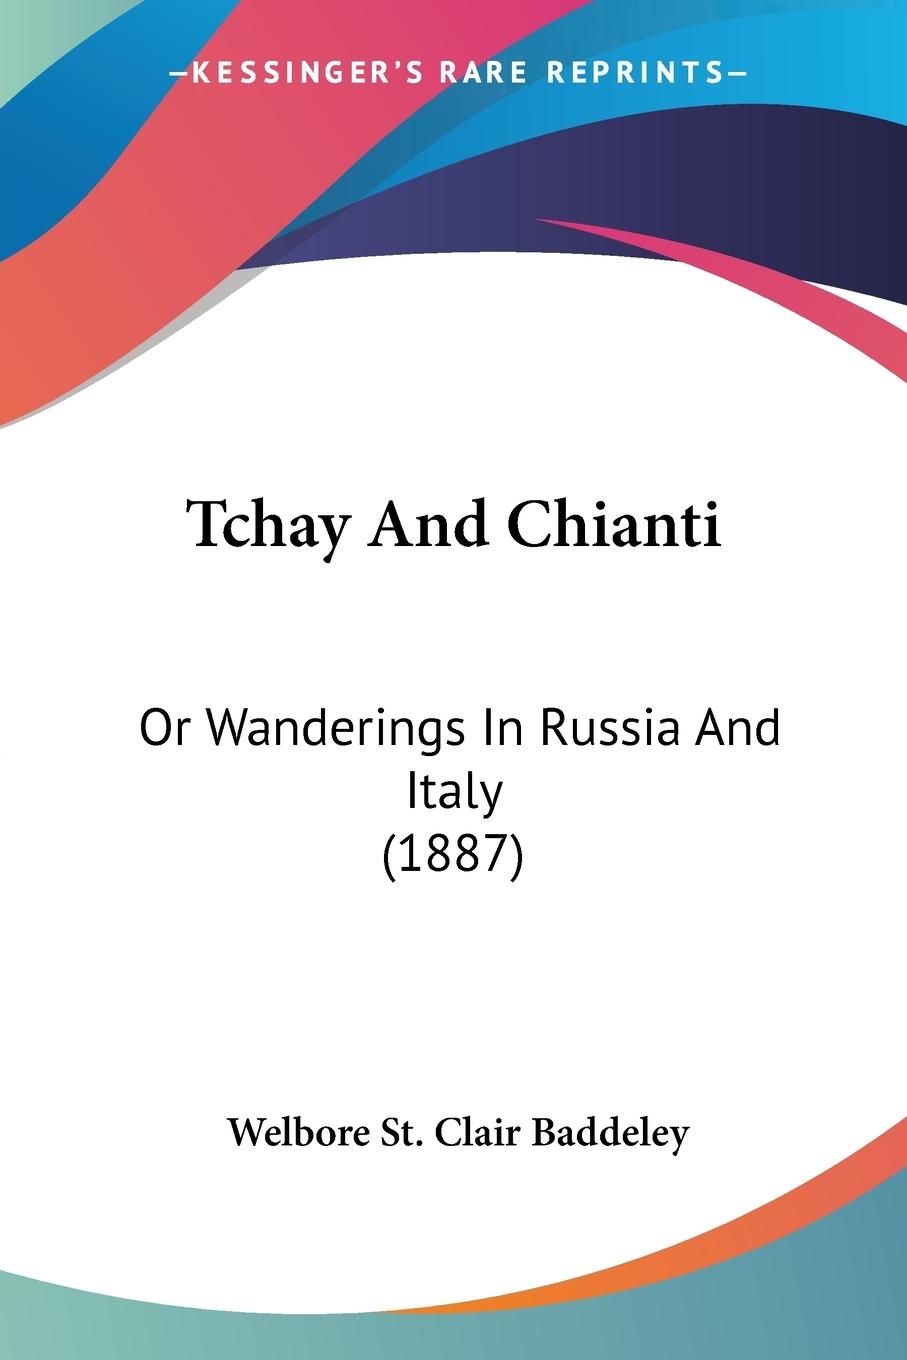 Tchay And Chianti - Baddeley, Welbore St. Clair